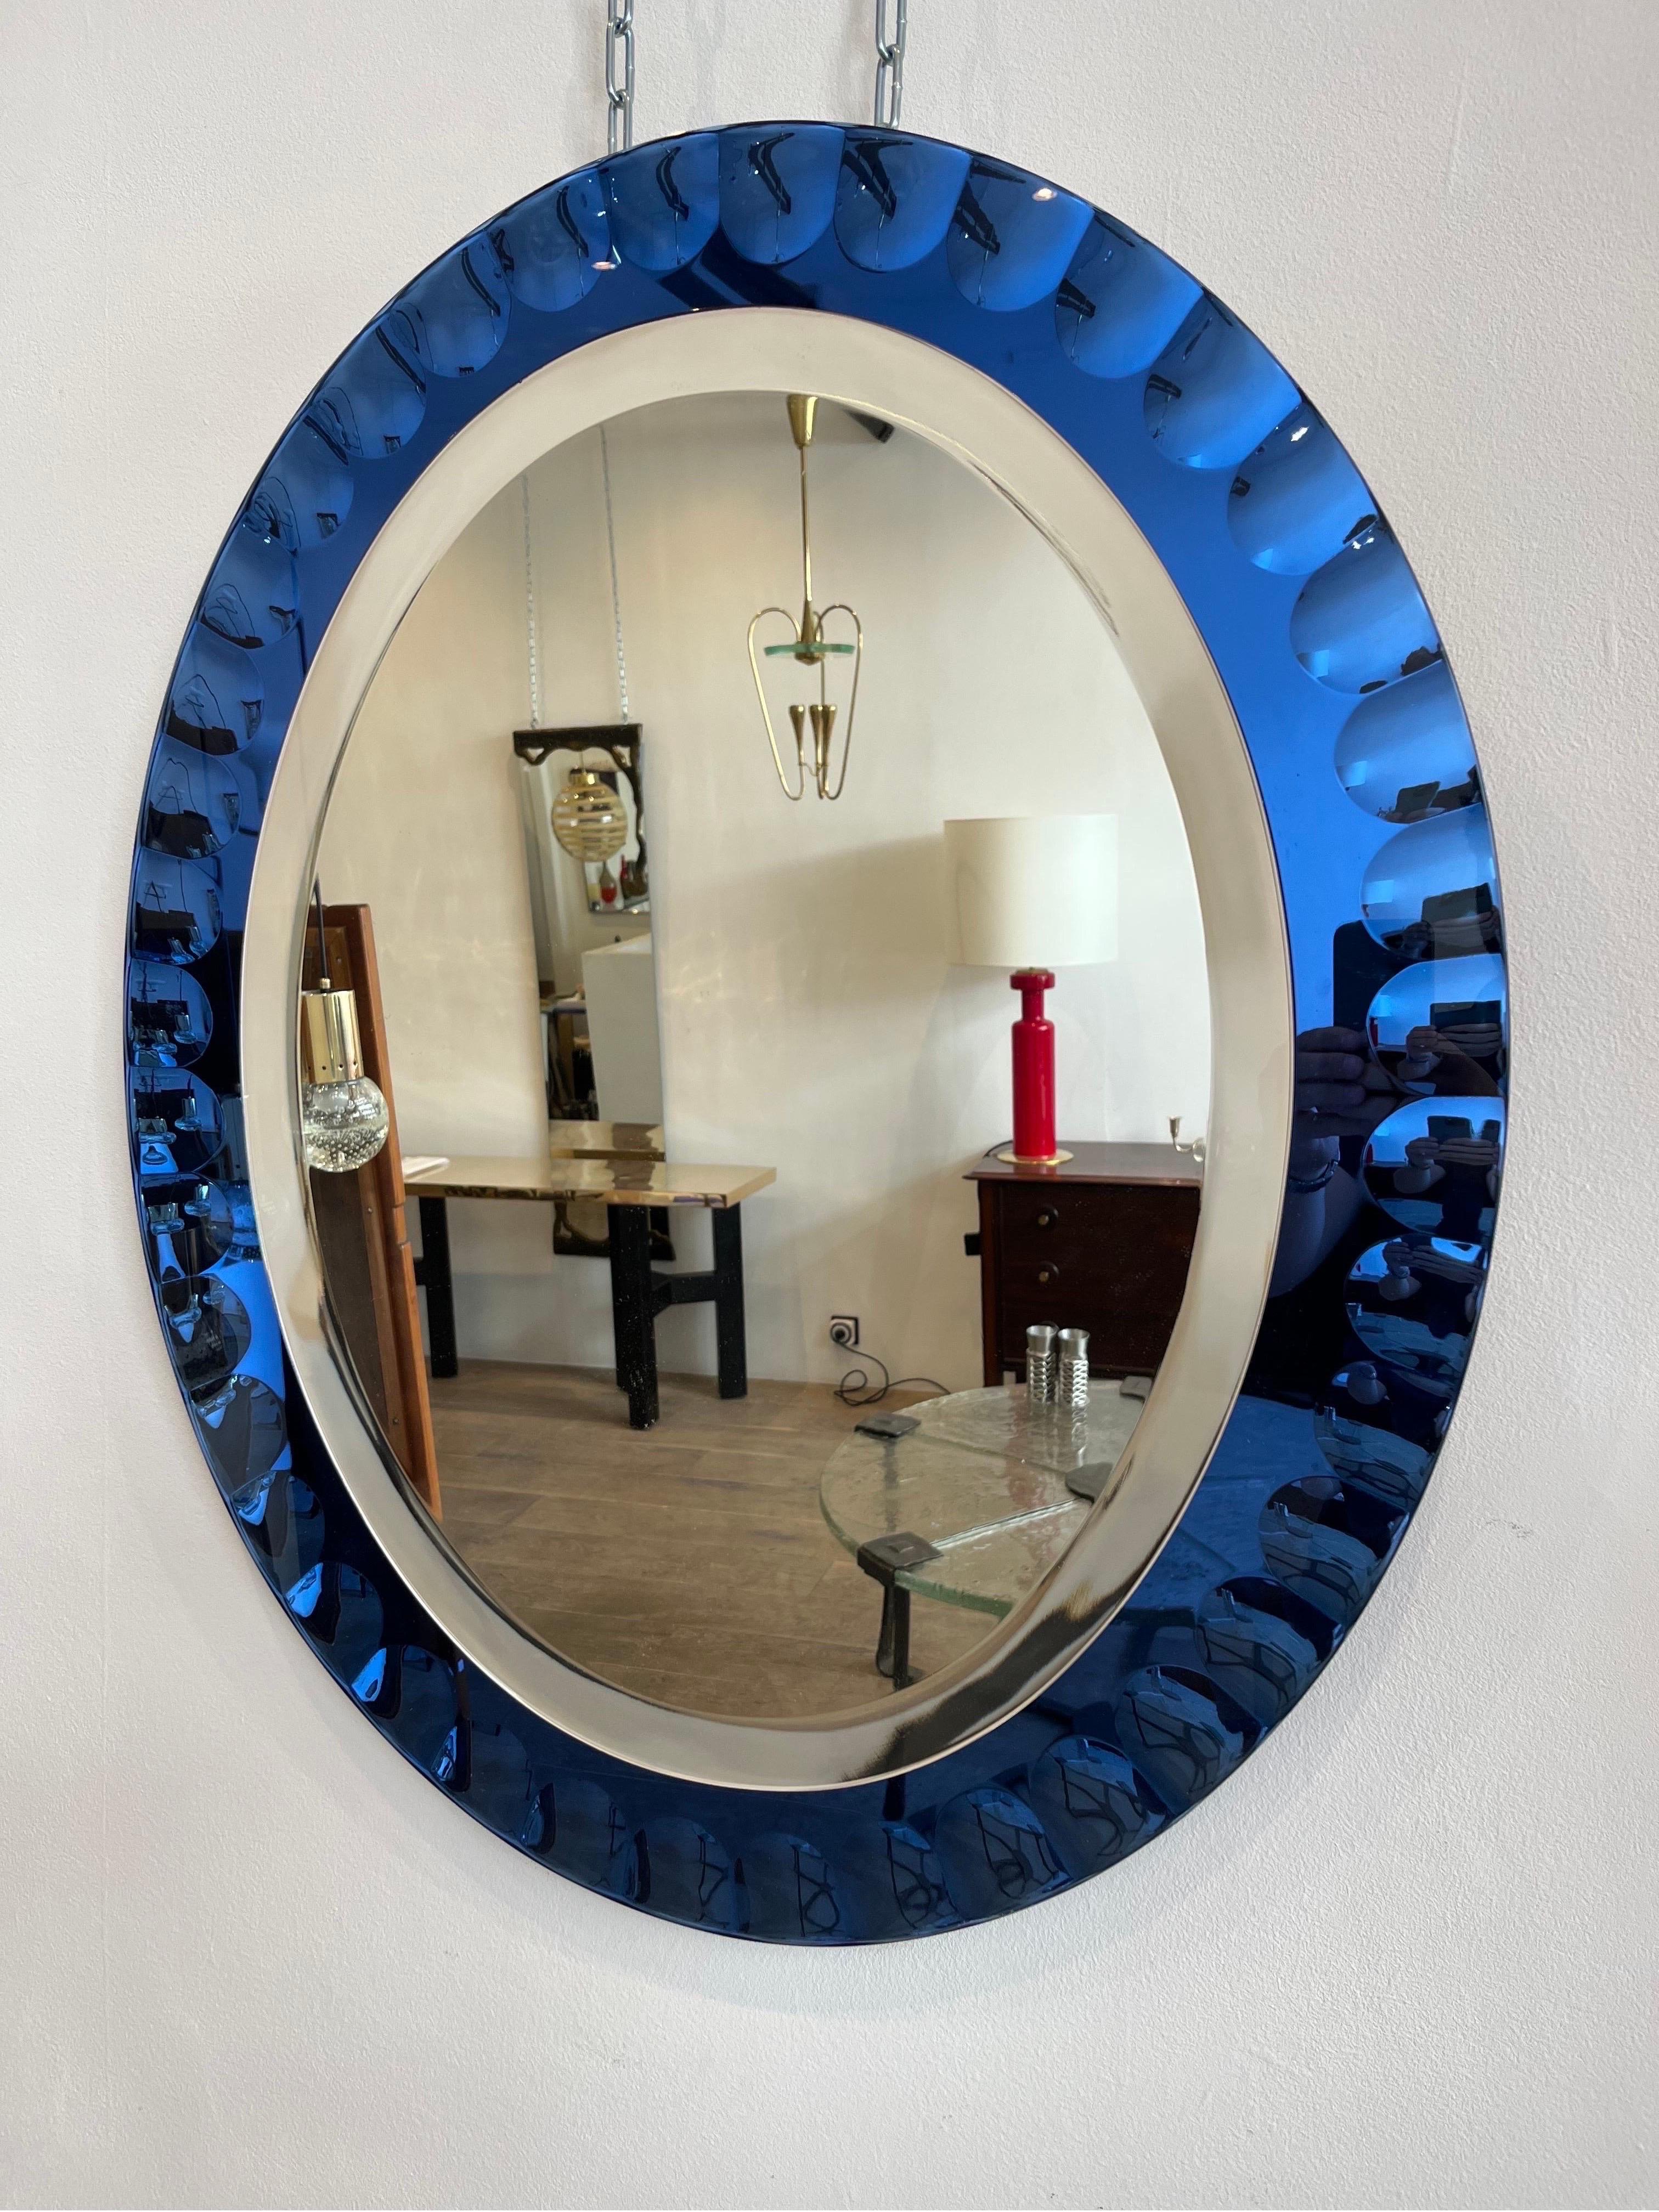 Cristal Arte is an important glass manufacturer from Torino. The present mirror dates circa 1960s. The external side is blue and worked in order to create to some interesting reflection of the light.